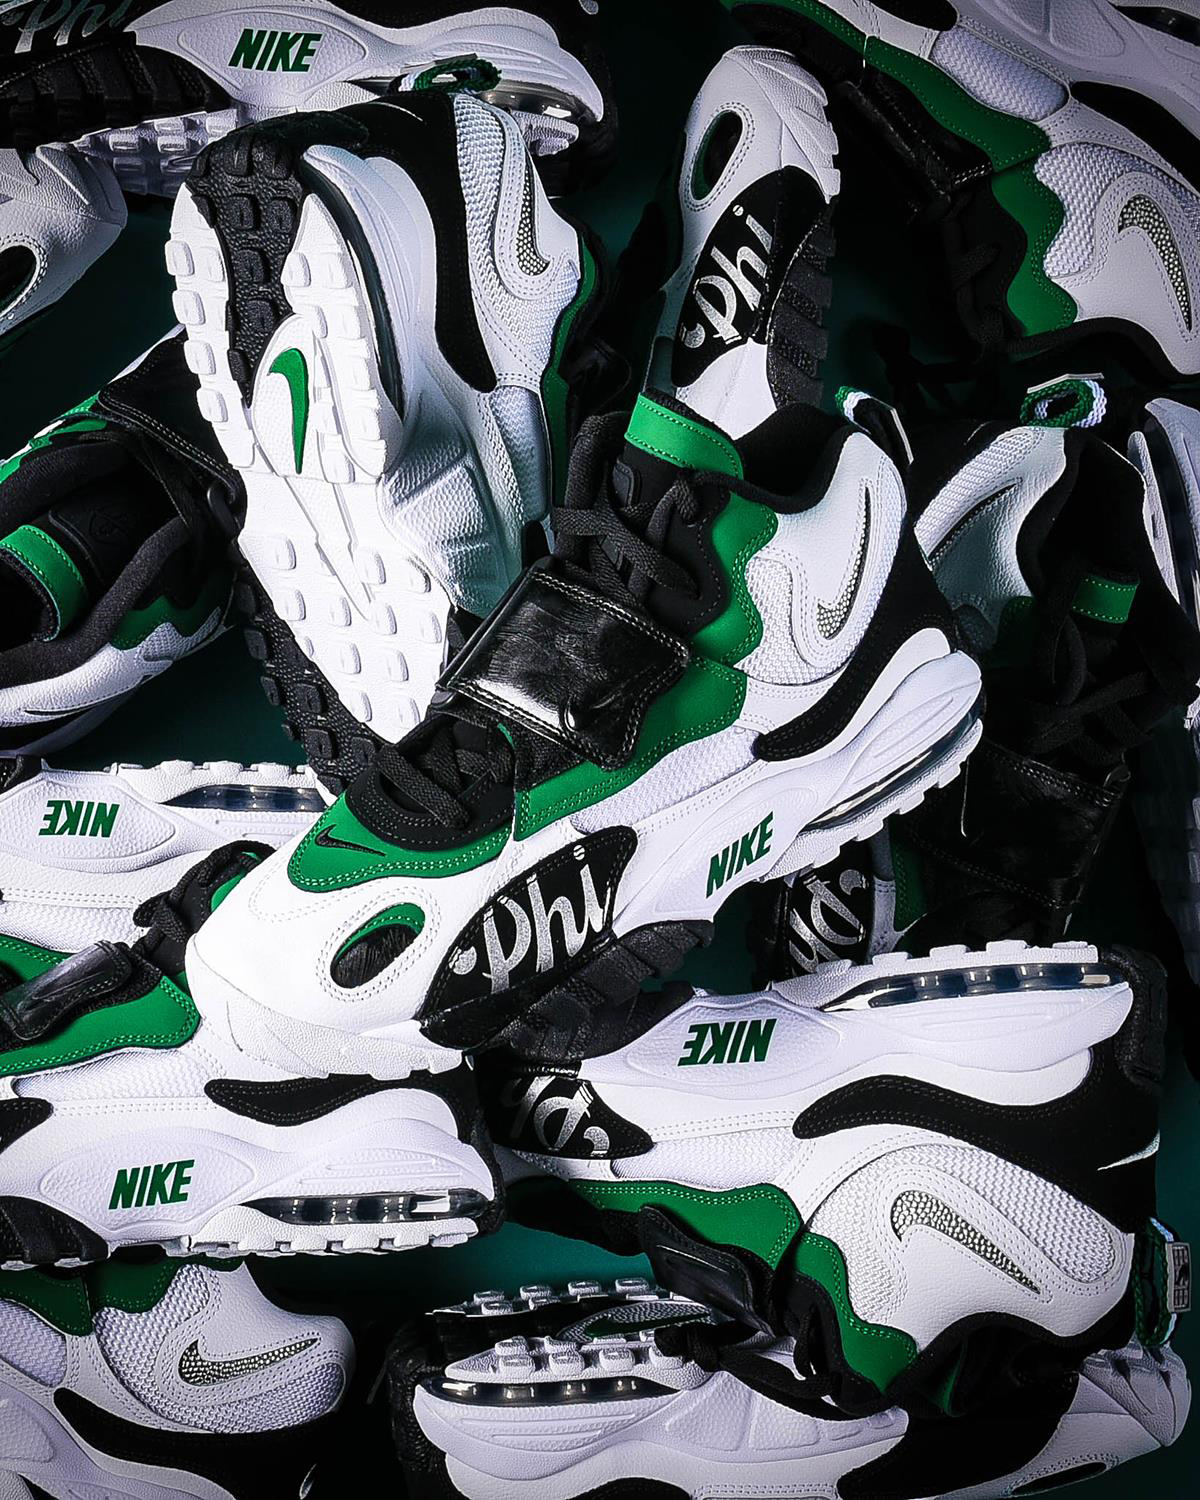 nike air max speed turf outfit